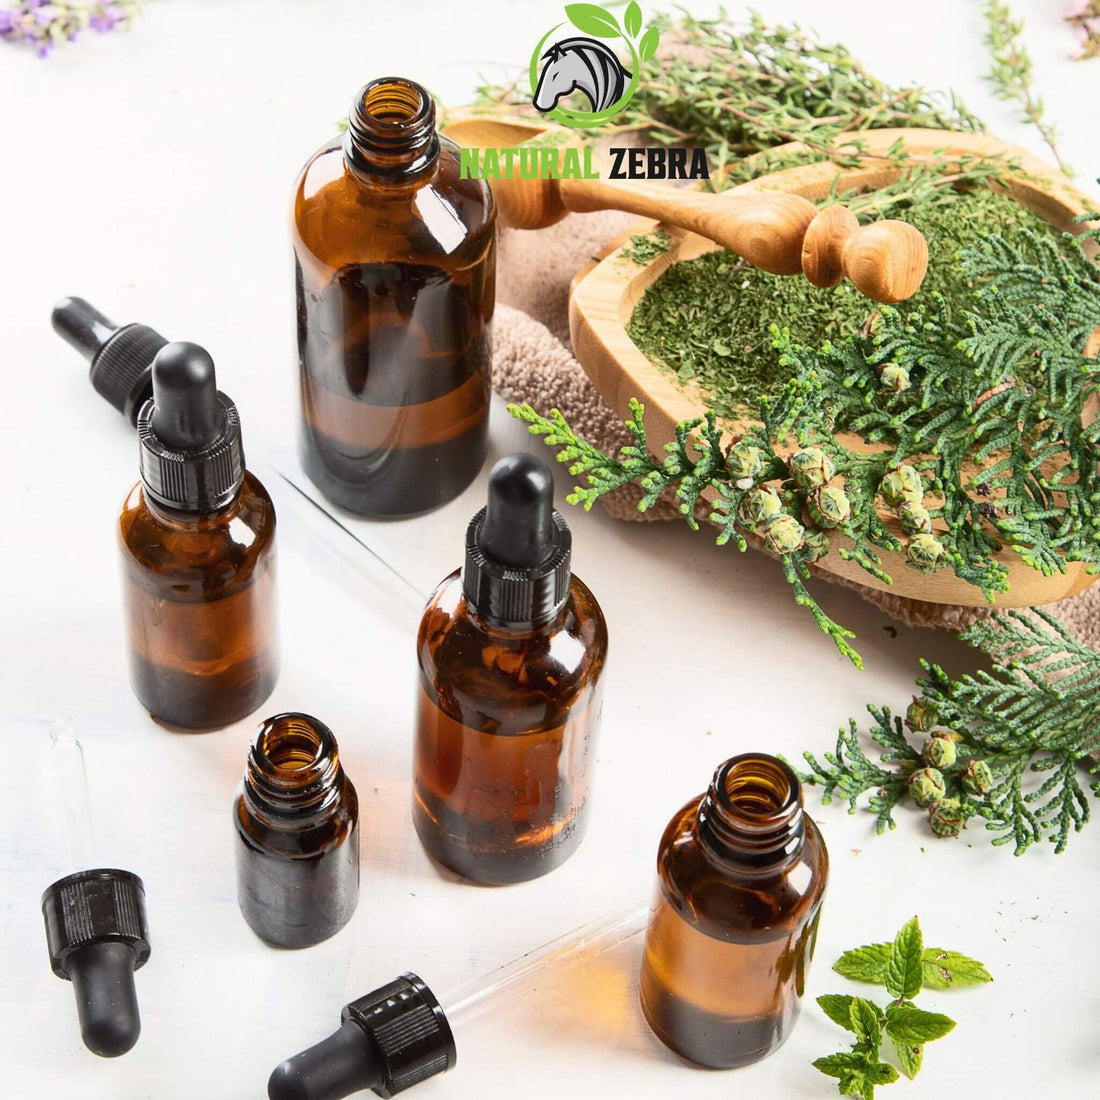 Aromatherapy - Using Essential Oils For Good Health.-NATURAL ZEBRA